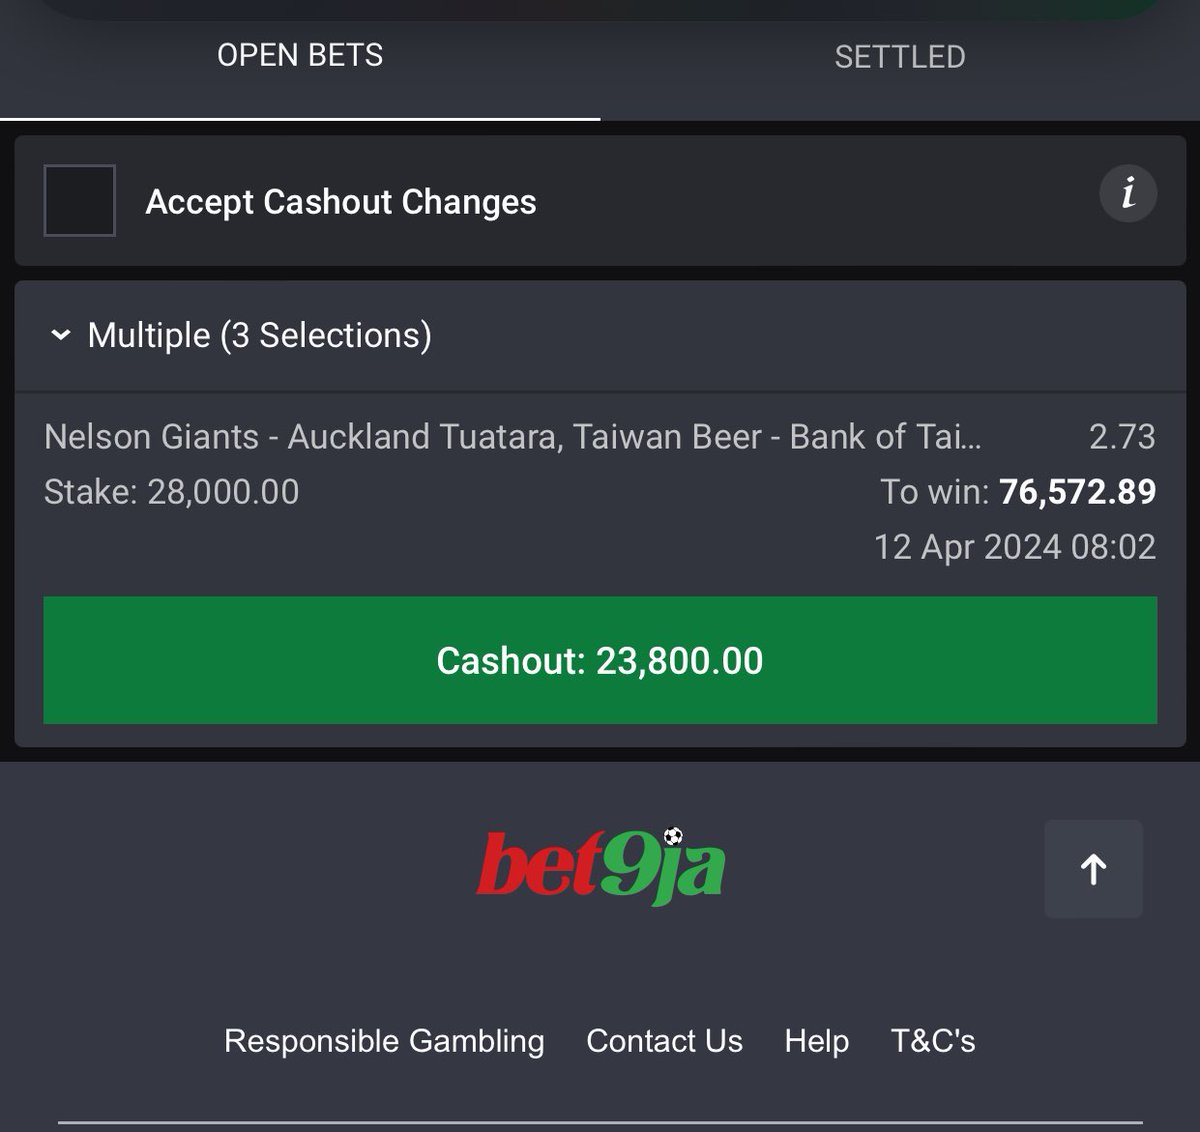 PLAY THIS GAME 3 ODDS ON BET9JA || CODE : 6GQTWDN REGISTER BET9JA USING THE LINK BELOW 👇 bit.ly/RealSuzzane ✅NO PROMO CODE NEEDED